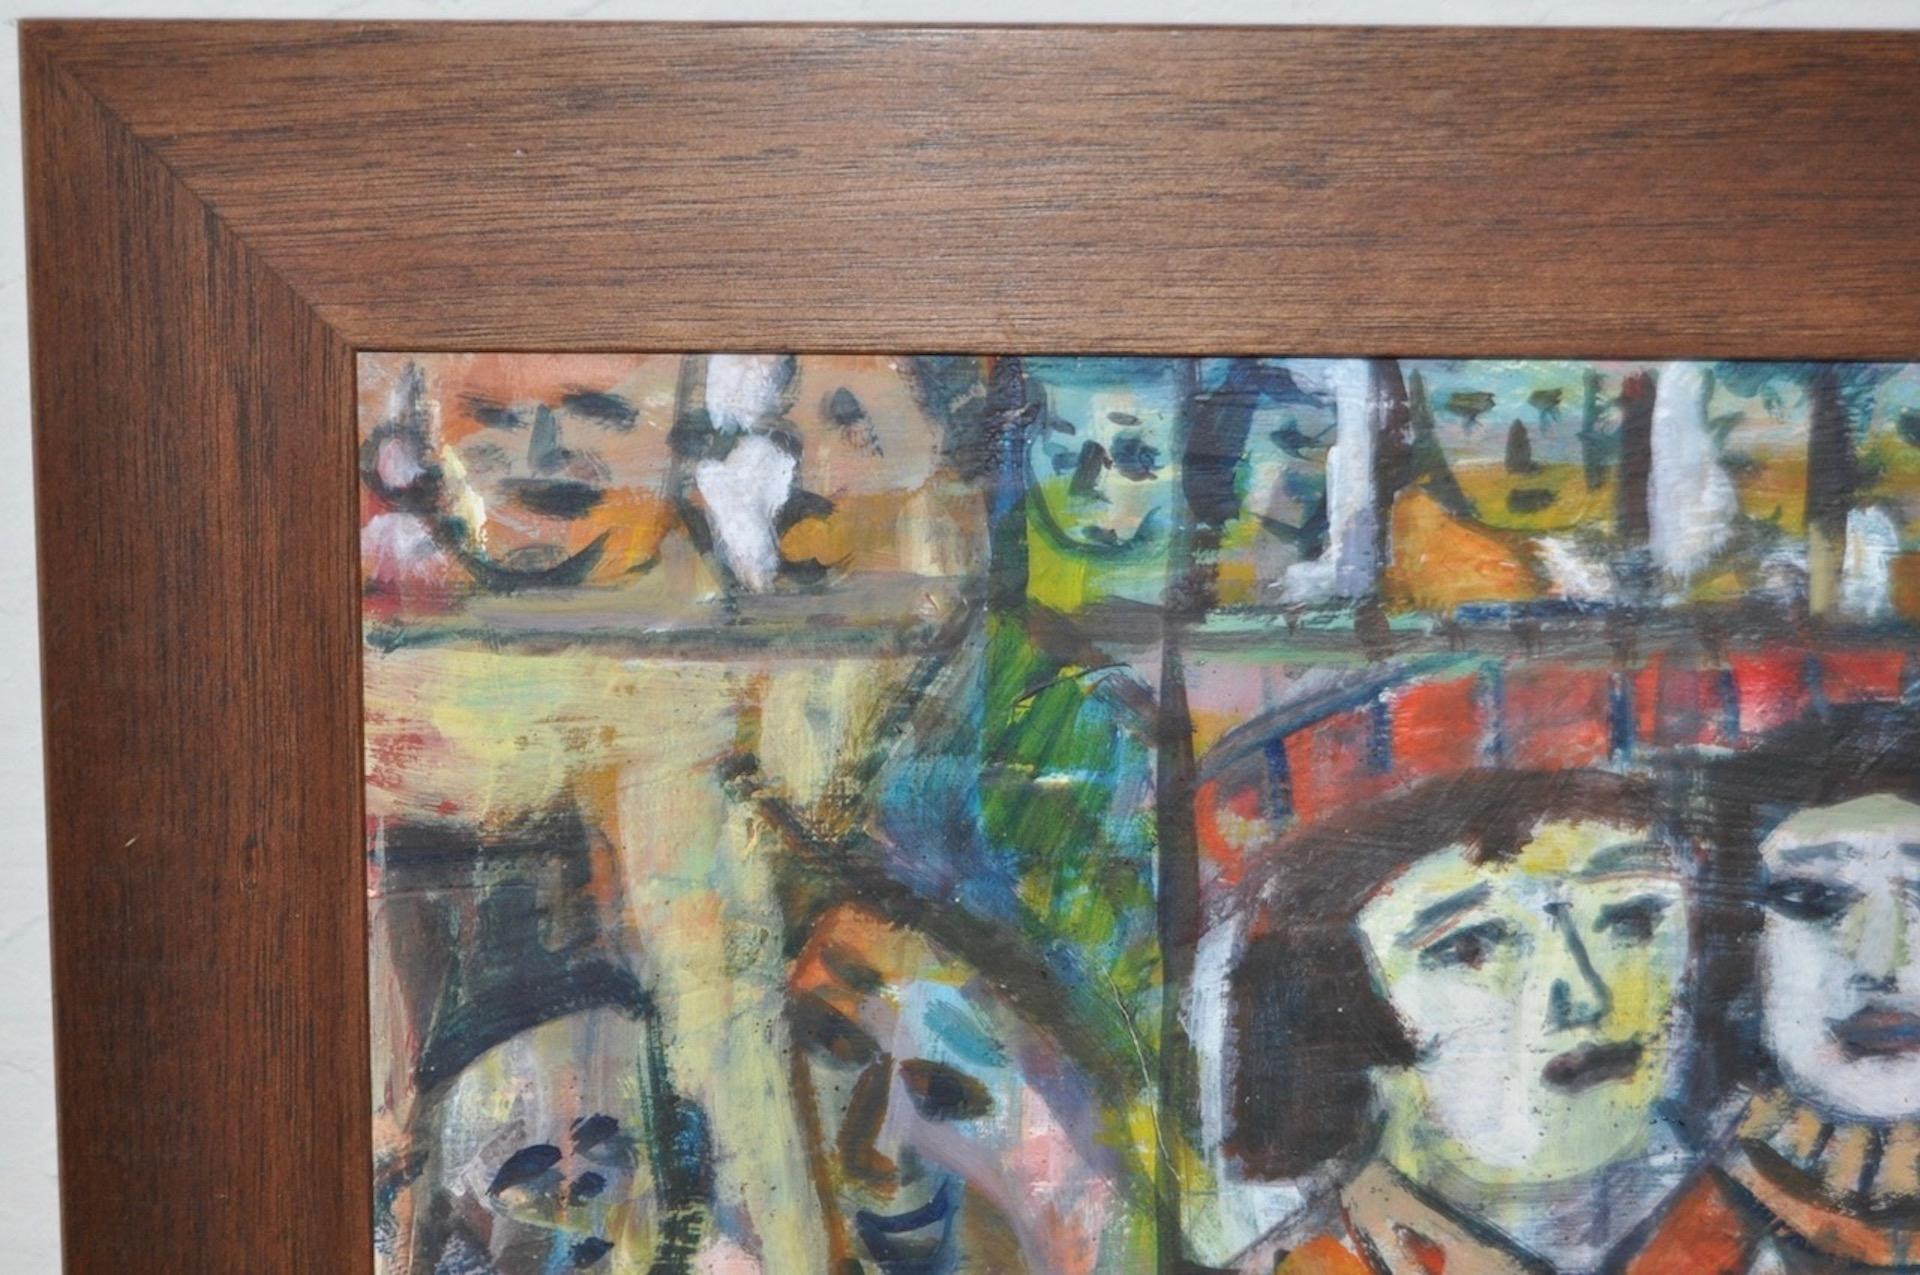 Frank Koci (1904-1983) Abstract w/ Colorful Figures Painting c.1950

Frank Koci flourished as an artist during the Beat Era of 1950s San Francisco.

This is a fantastic painting with multiple figures and face, all in bright colors.

Original oil on